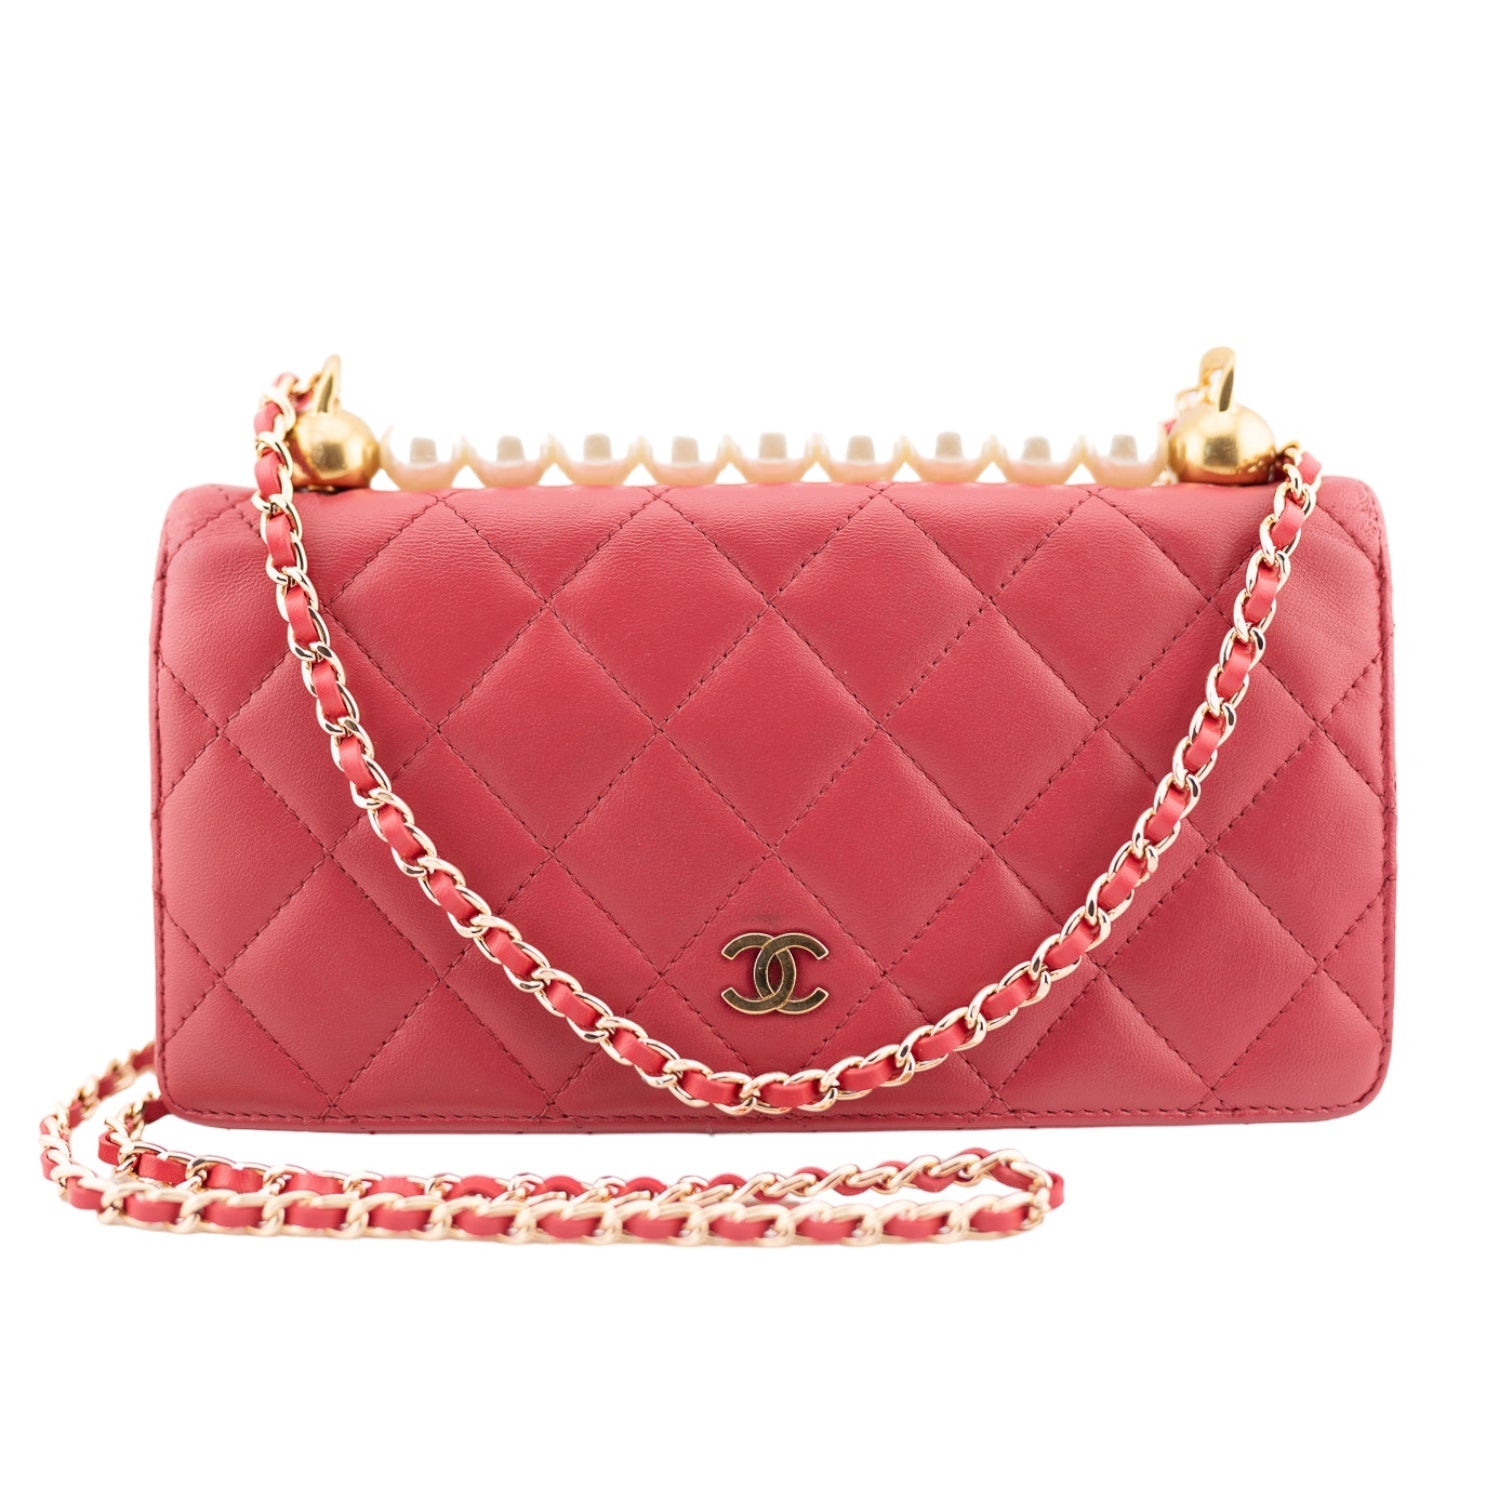 CHANEL Lambskin Bifold Wallet with Pearl Crown & Leather Chain - Bag Envy